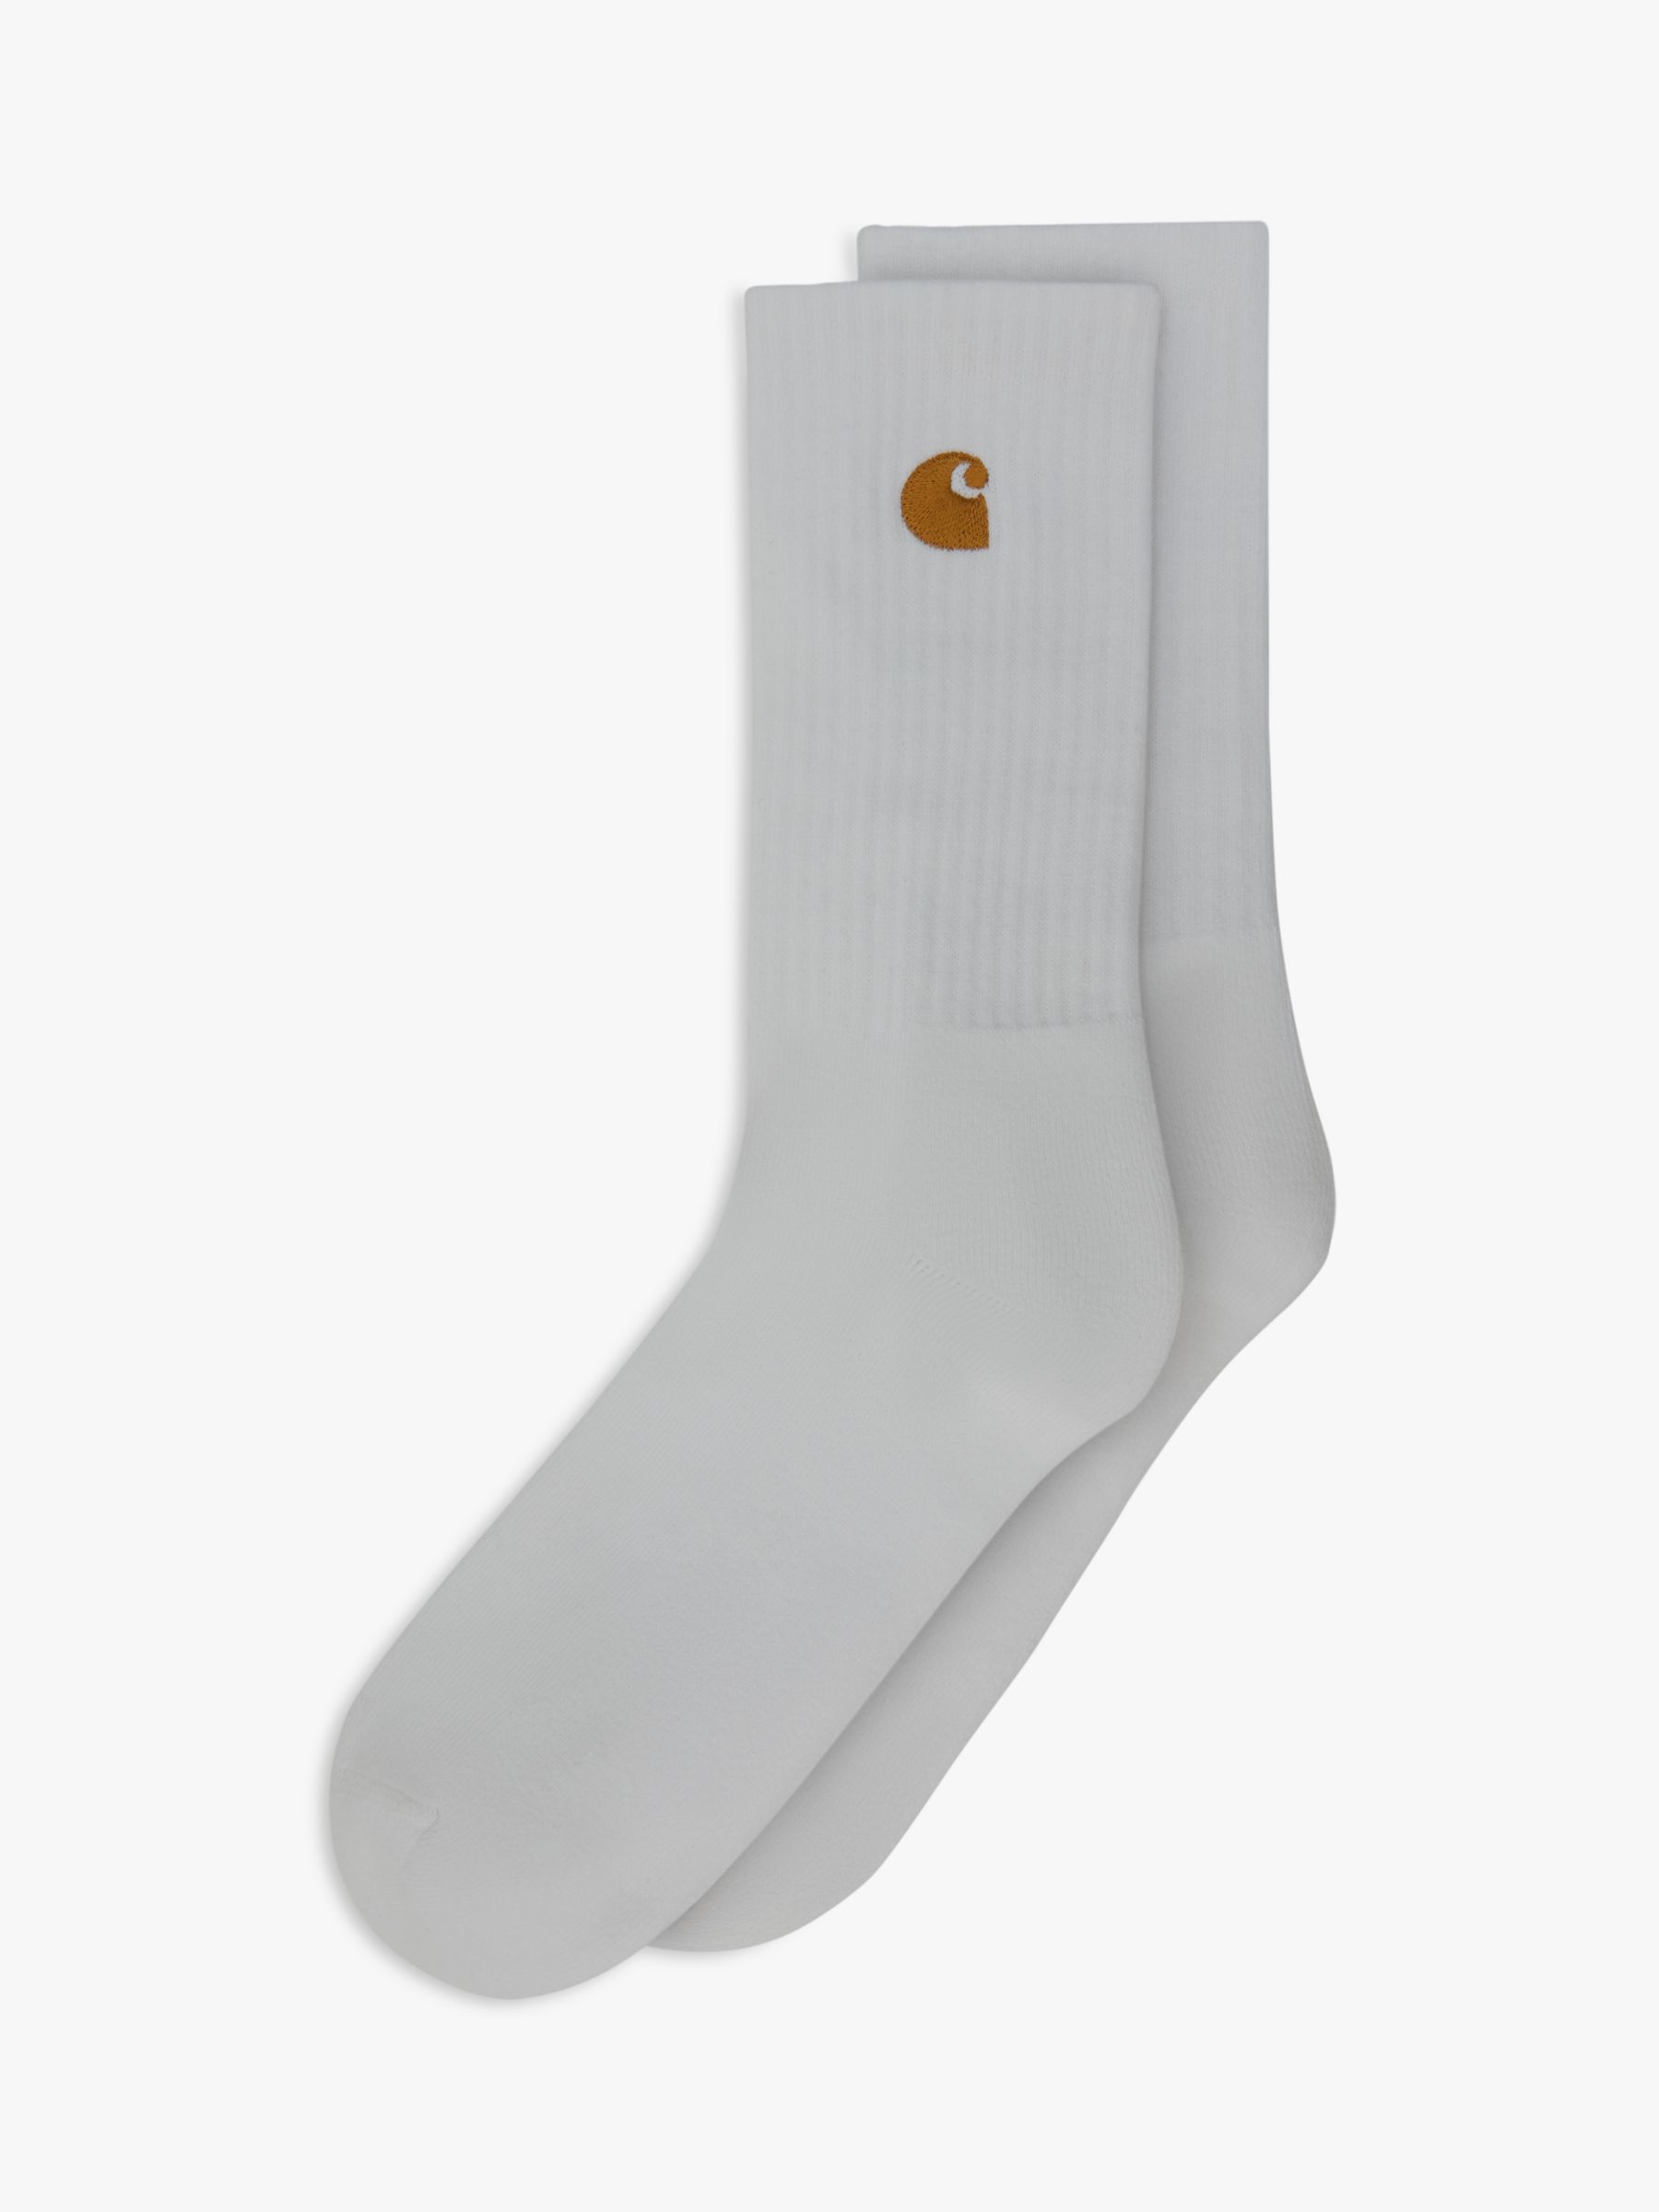 Carhartt WIP Chase Socks, One Size, White at John Lewis & Partners